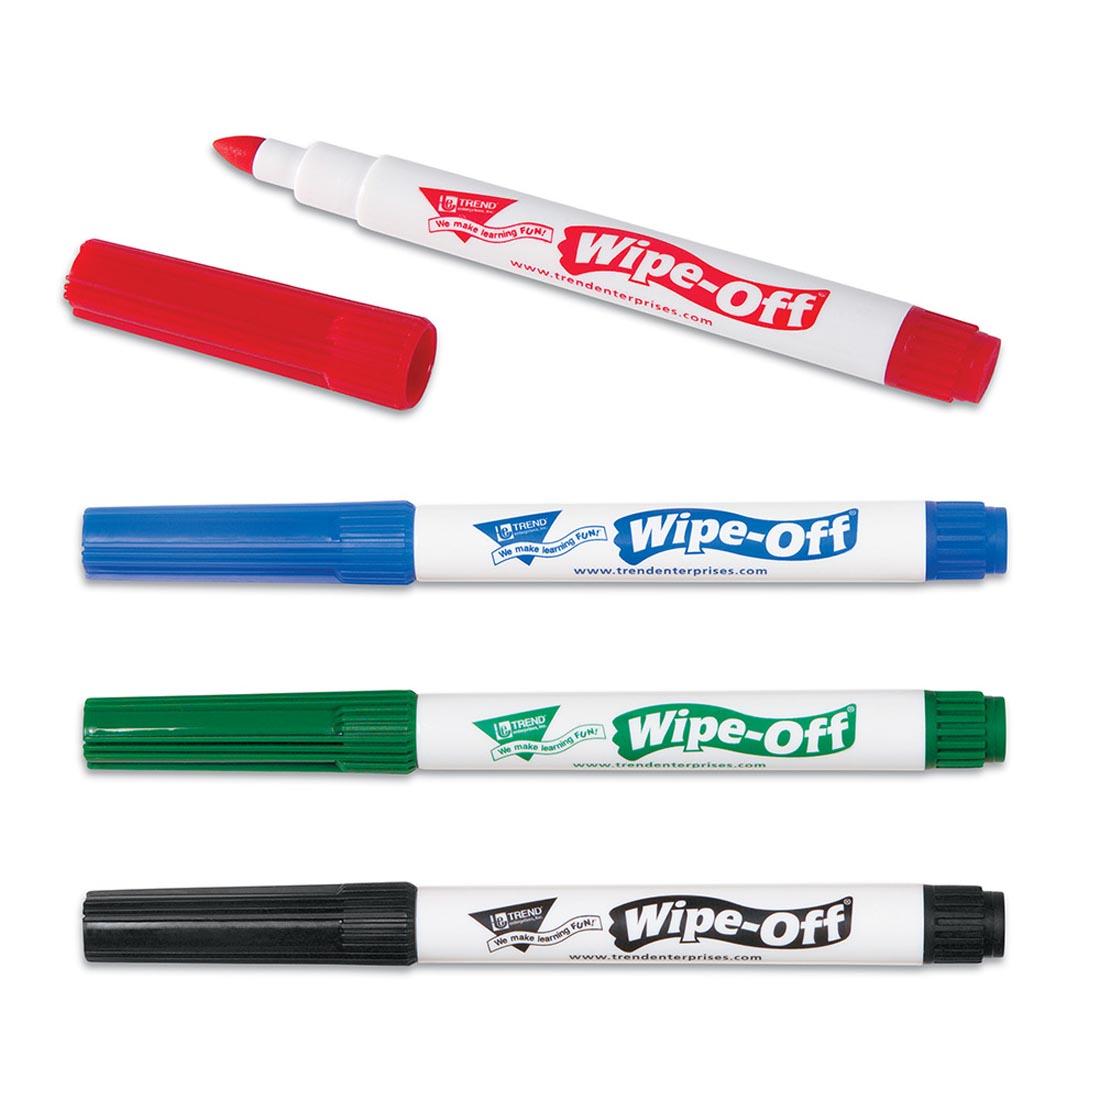 TREND Primary Wipe-Off Markers in black, green, blue and red